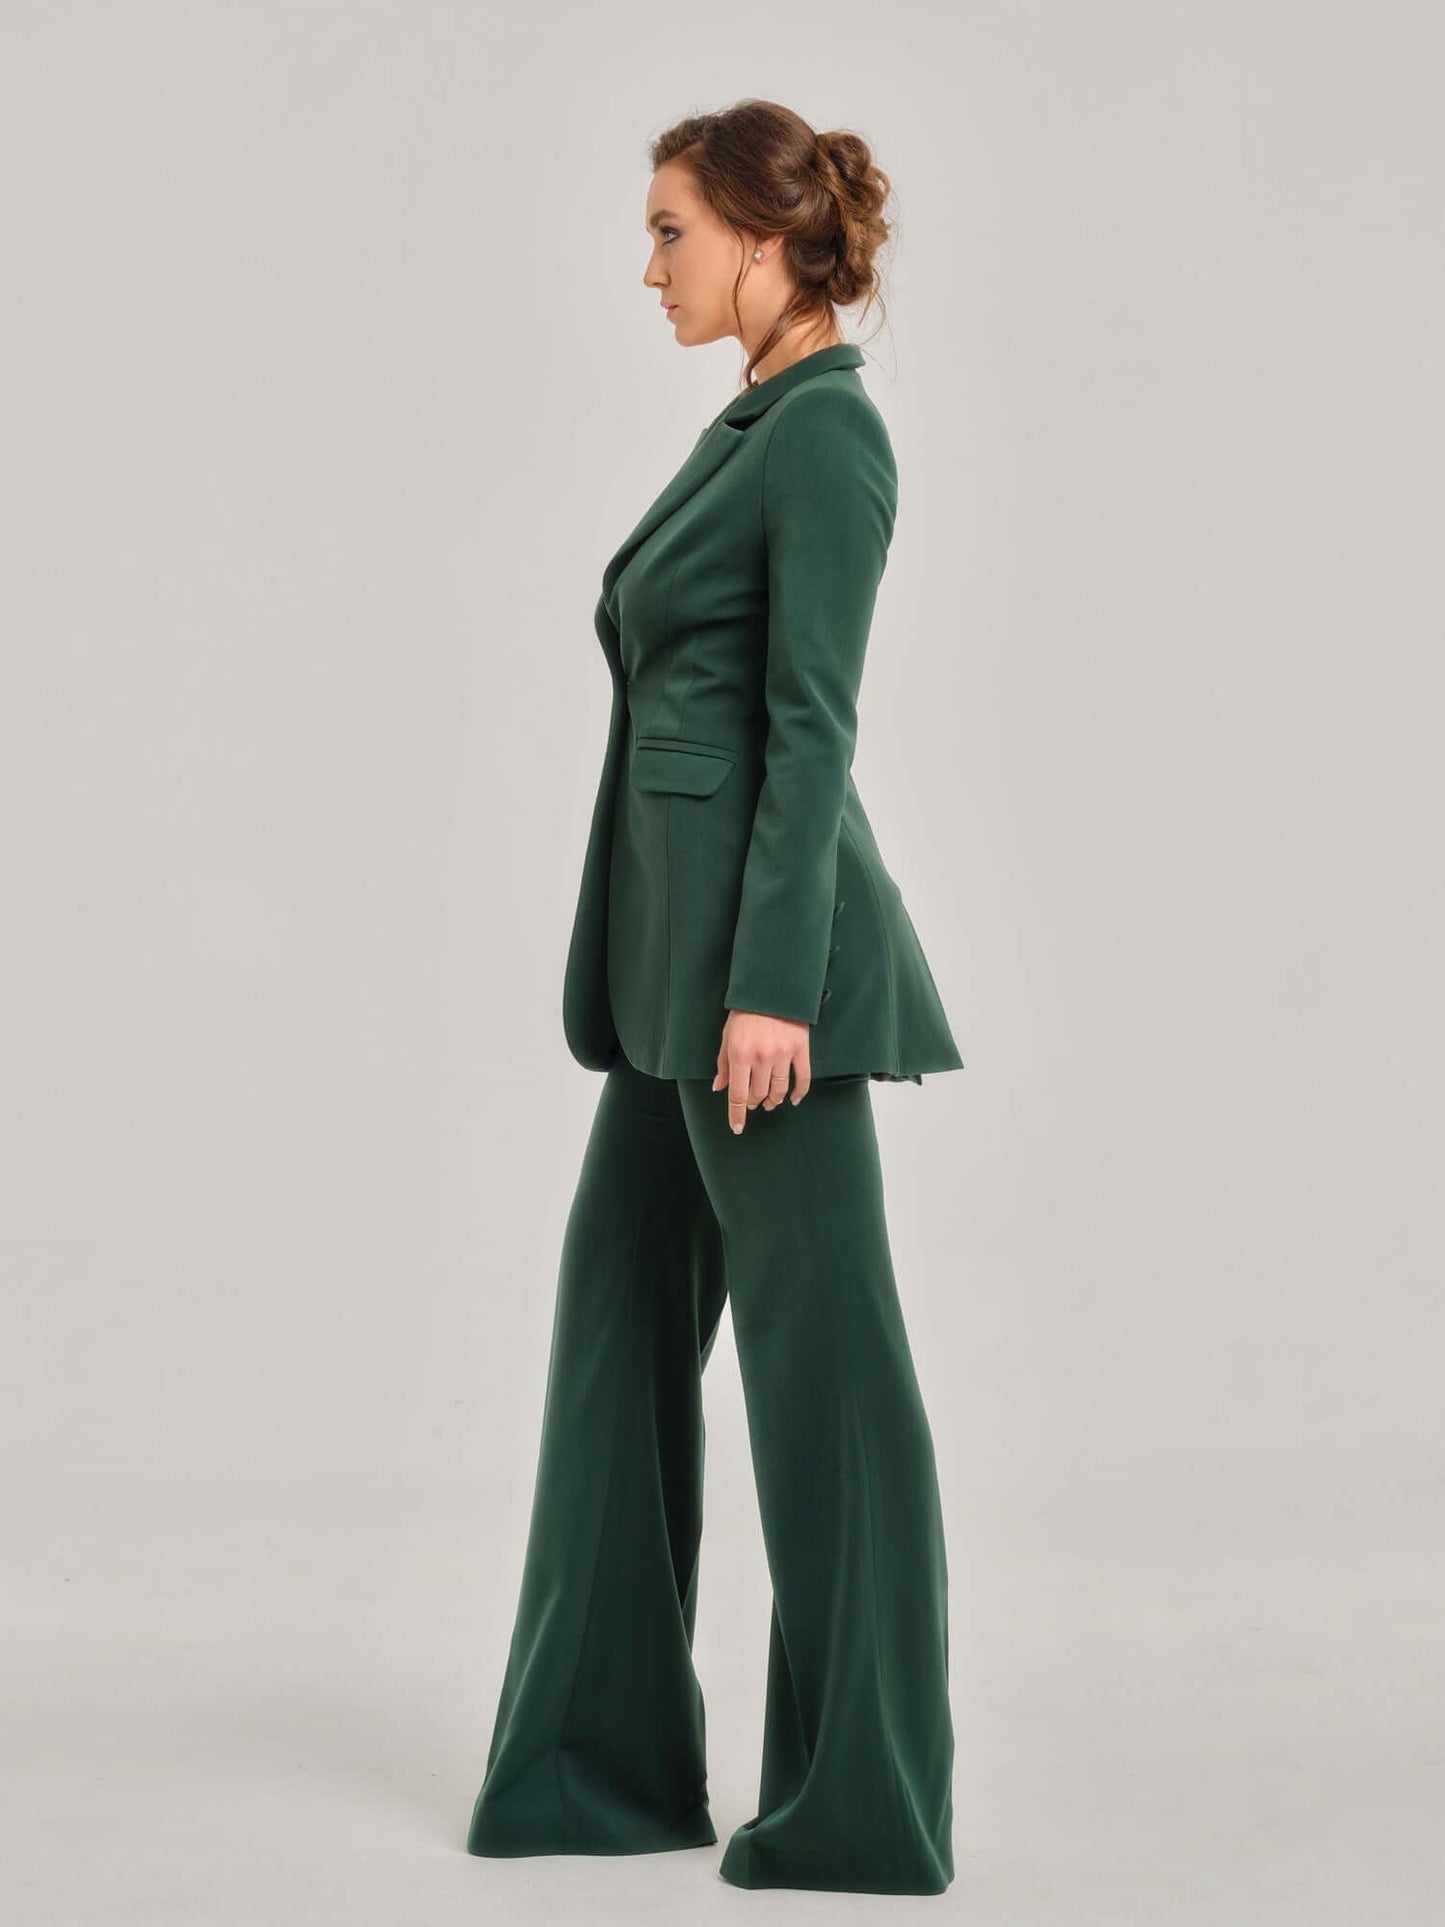 Tia Dorraine Emerald Dream Timeless Classic Blazer The thigh-length blazer is one of our favourite pieces. This statement piece features a single large button closure that emphasizes its streamlined design. It stands out with its structured shoulders, bea